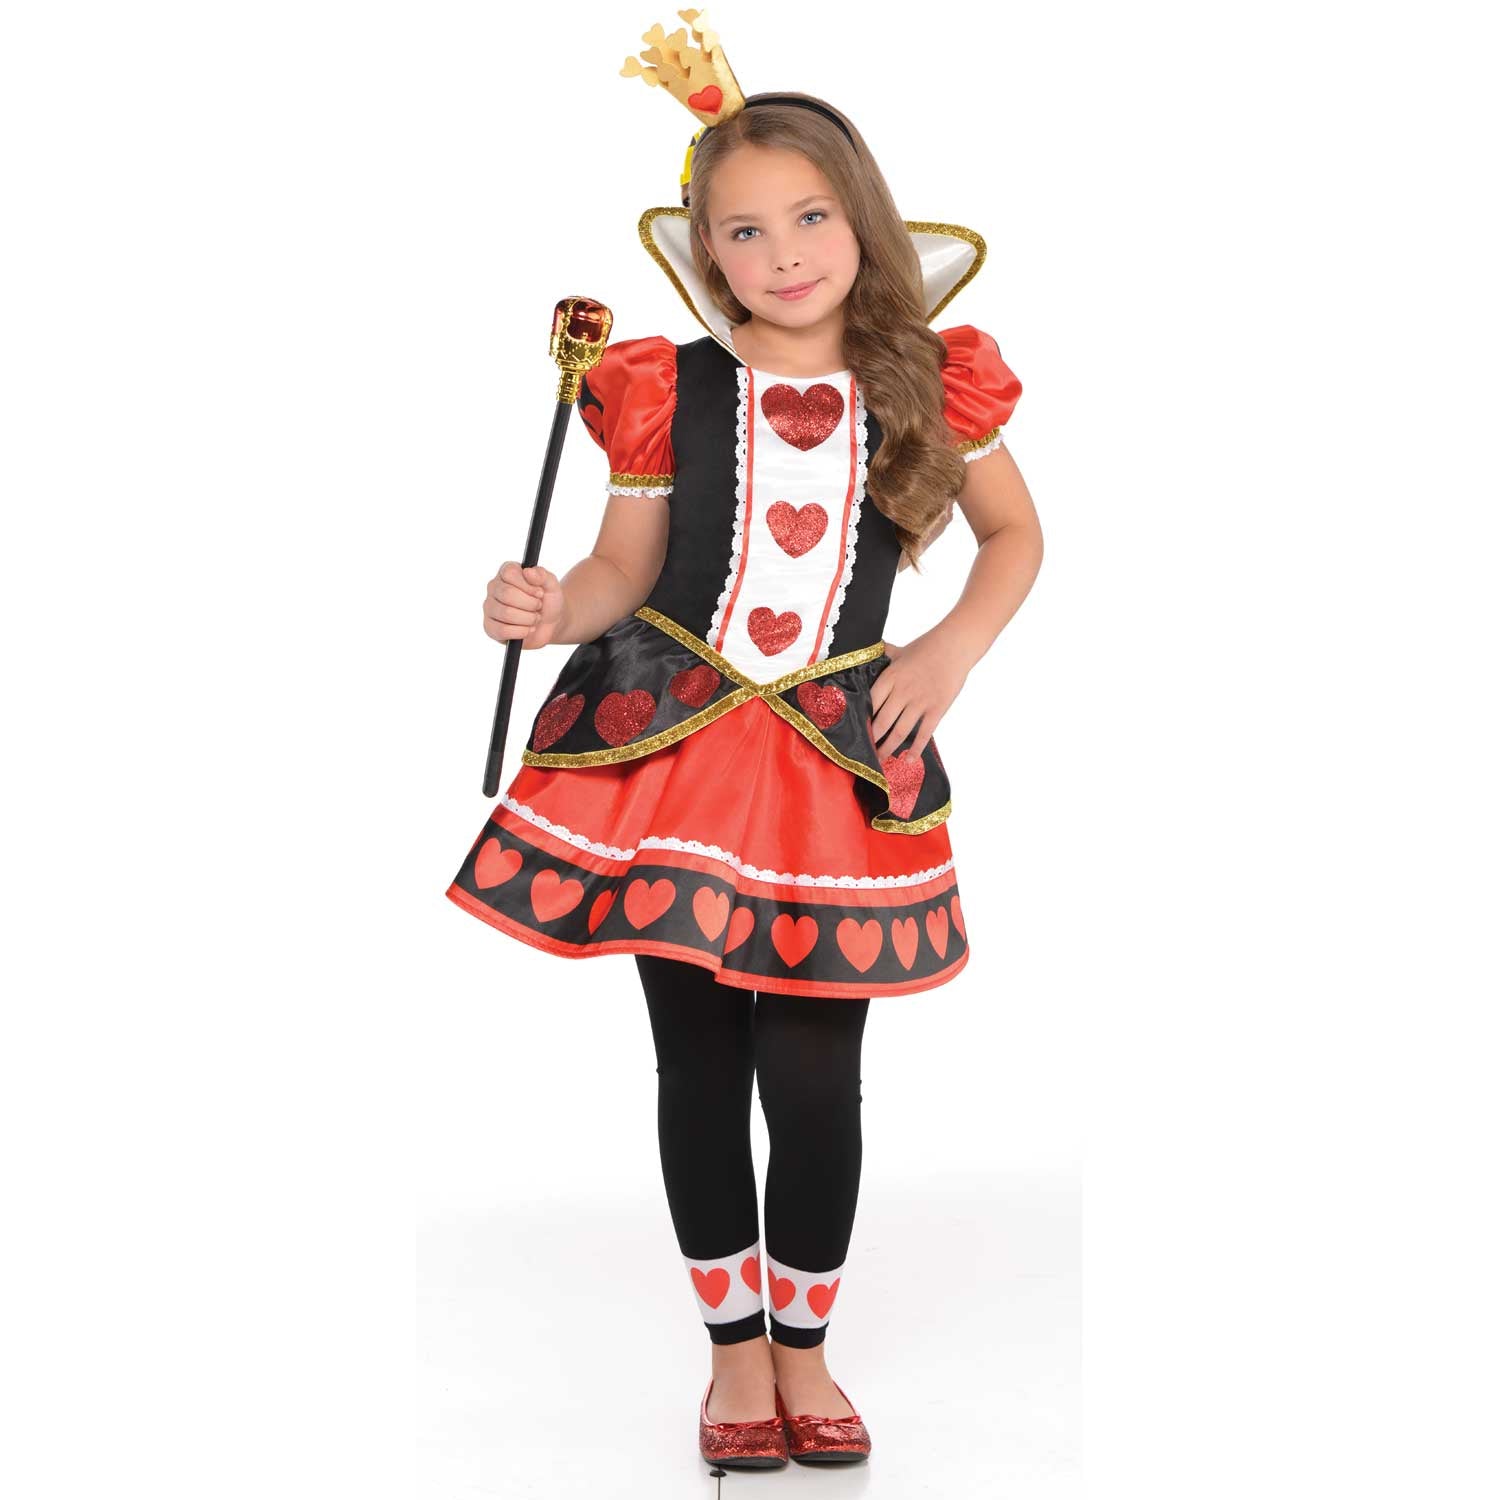 Queen of Hearts Costume - Childs – The Party Box - Reading, Berkshire